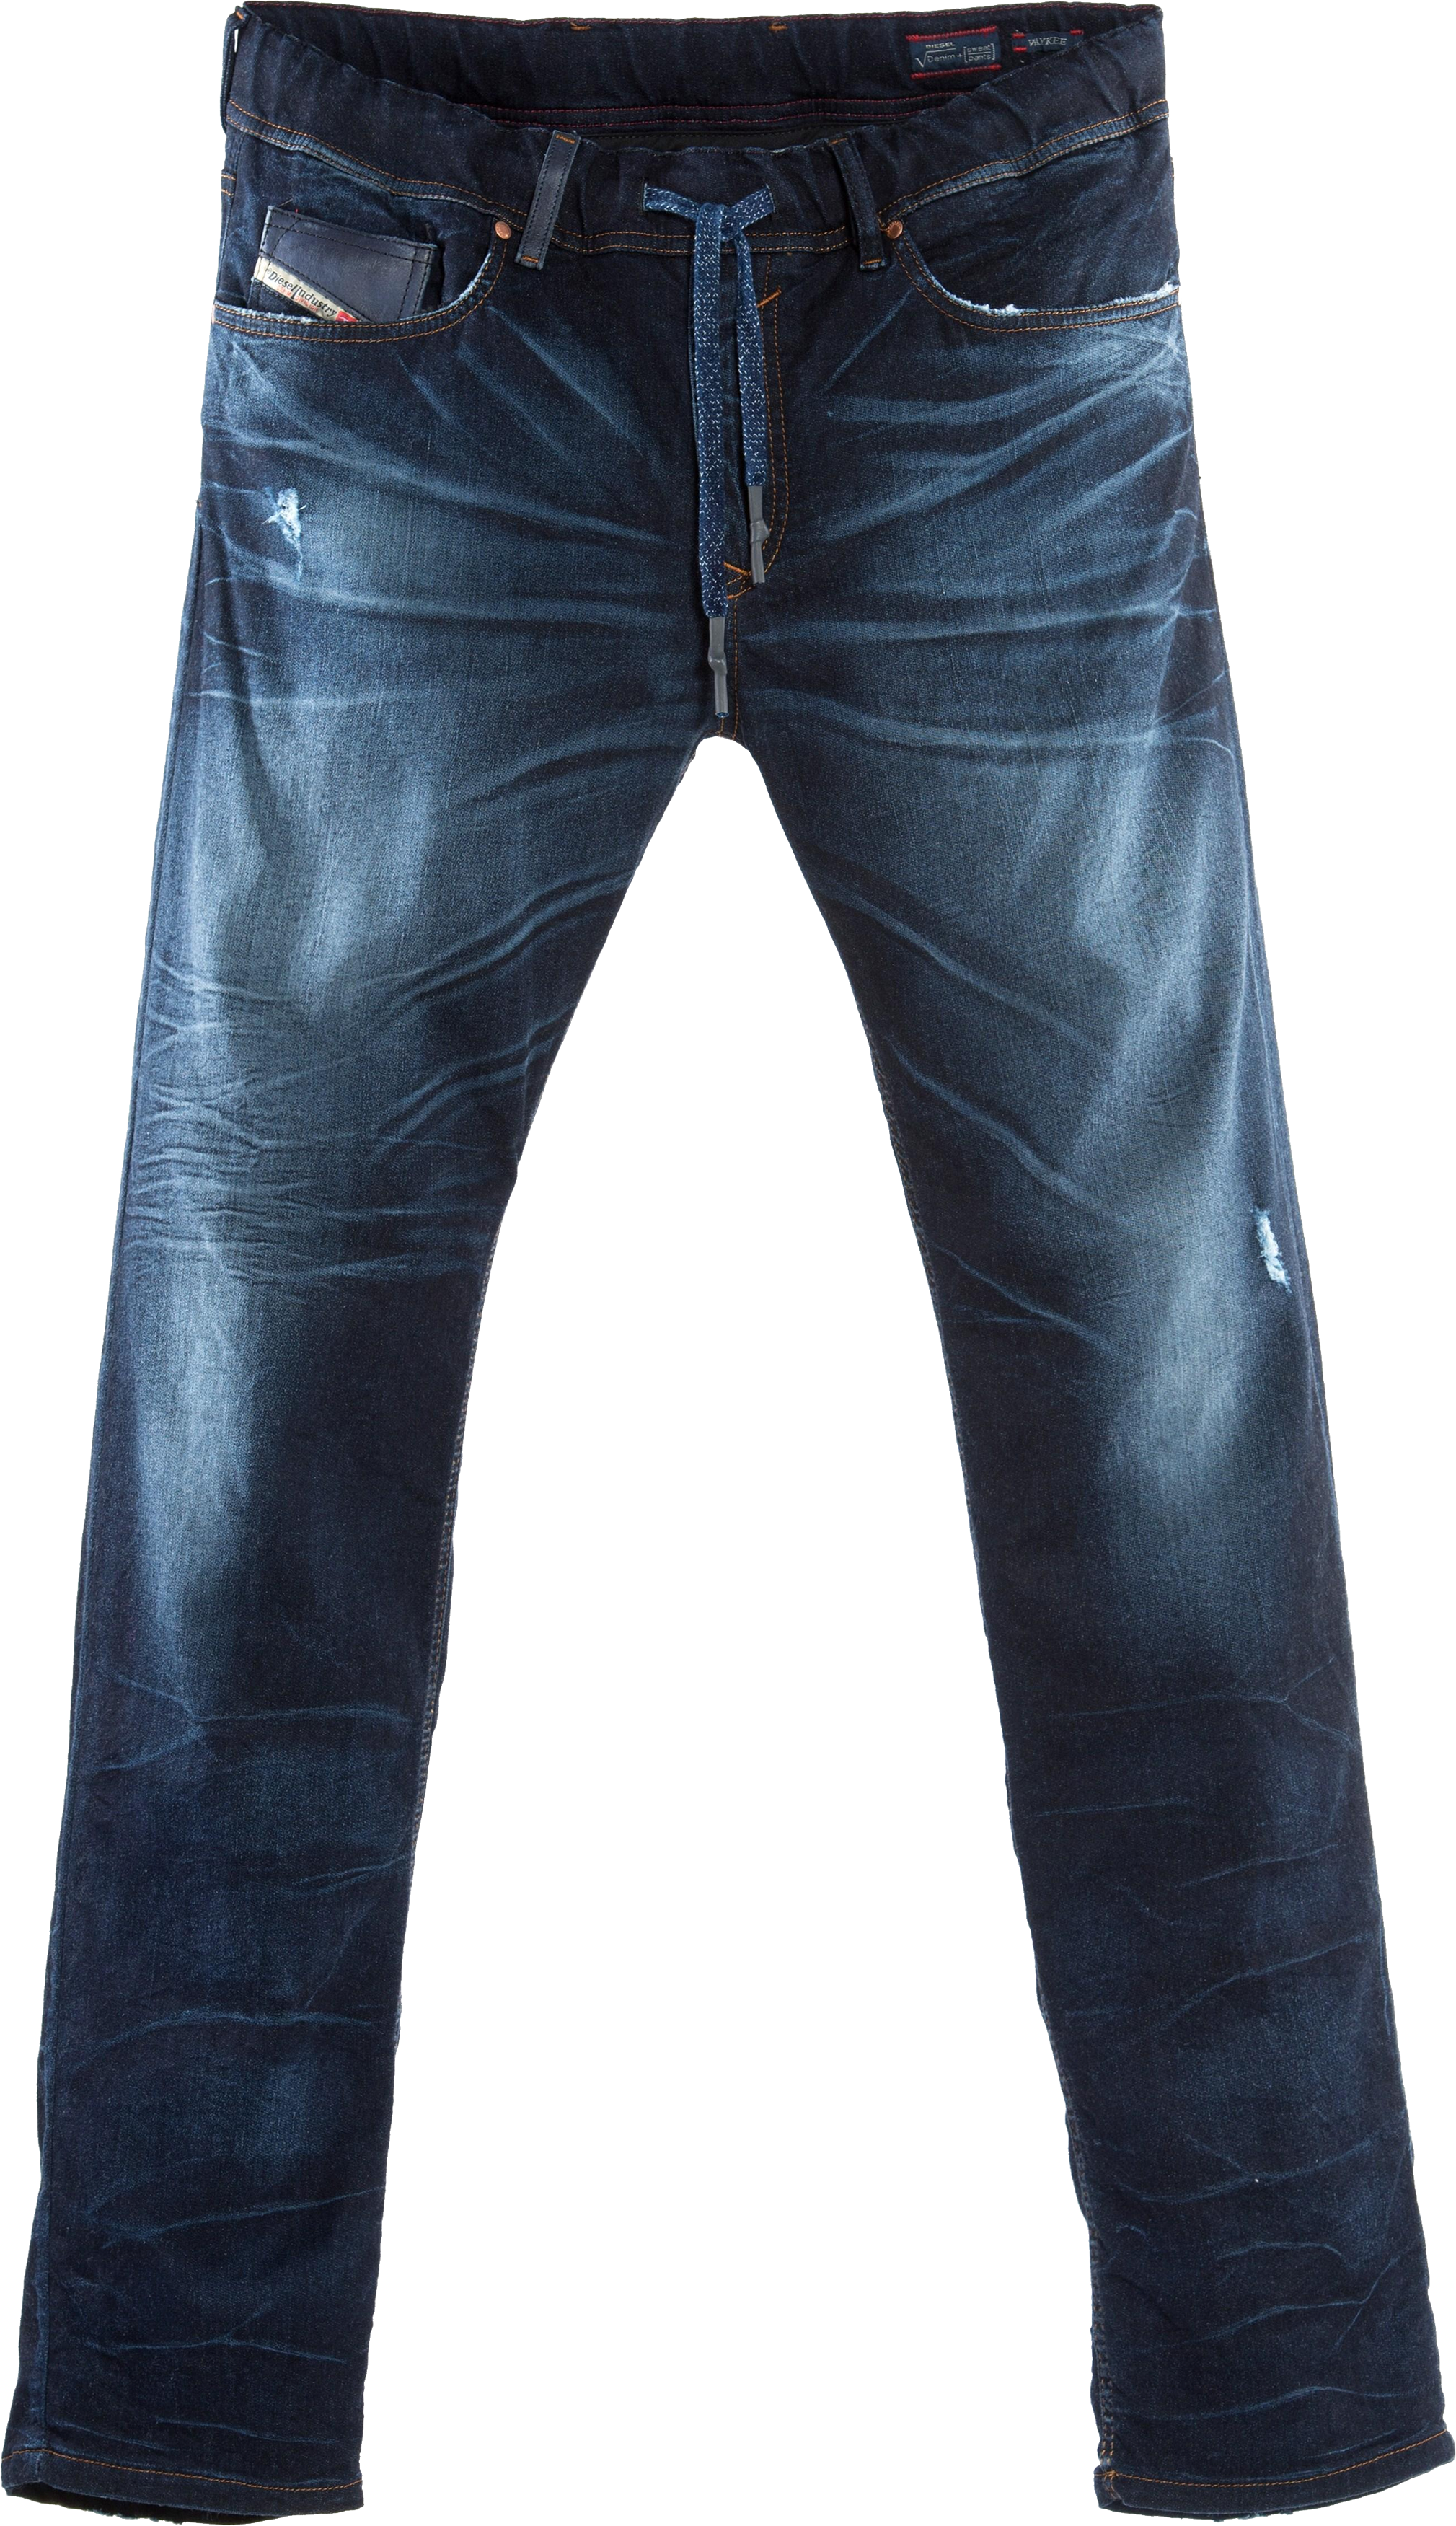 Jeans PNG High-Quality Image